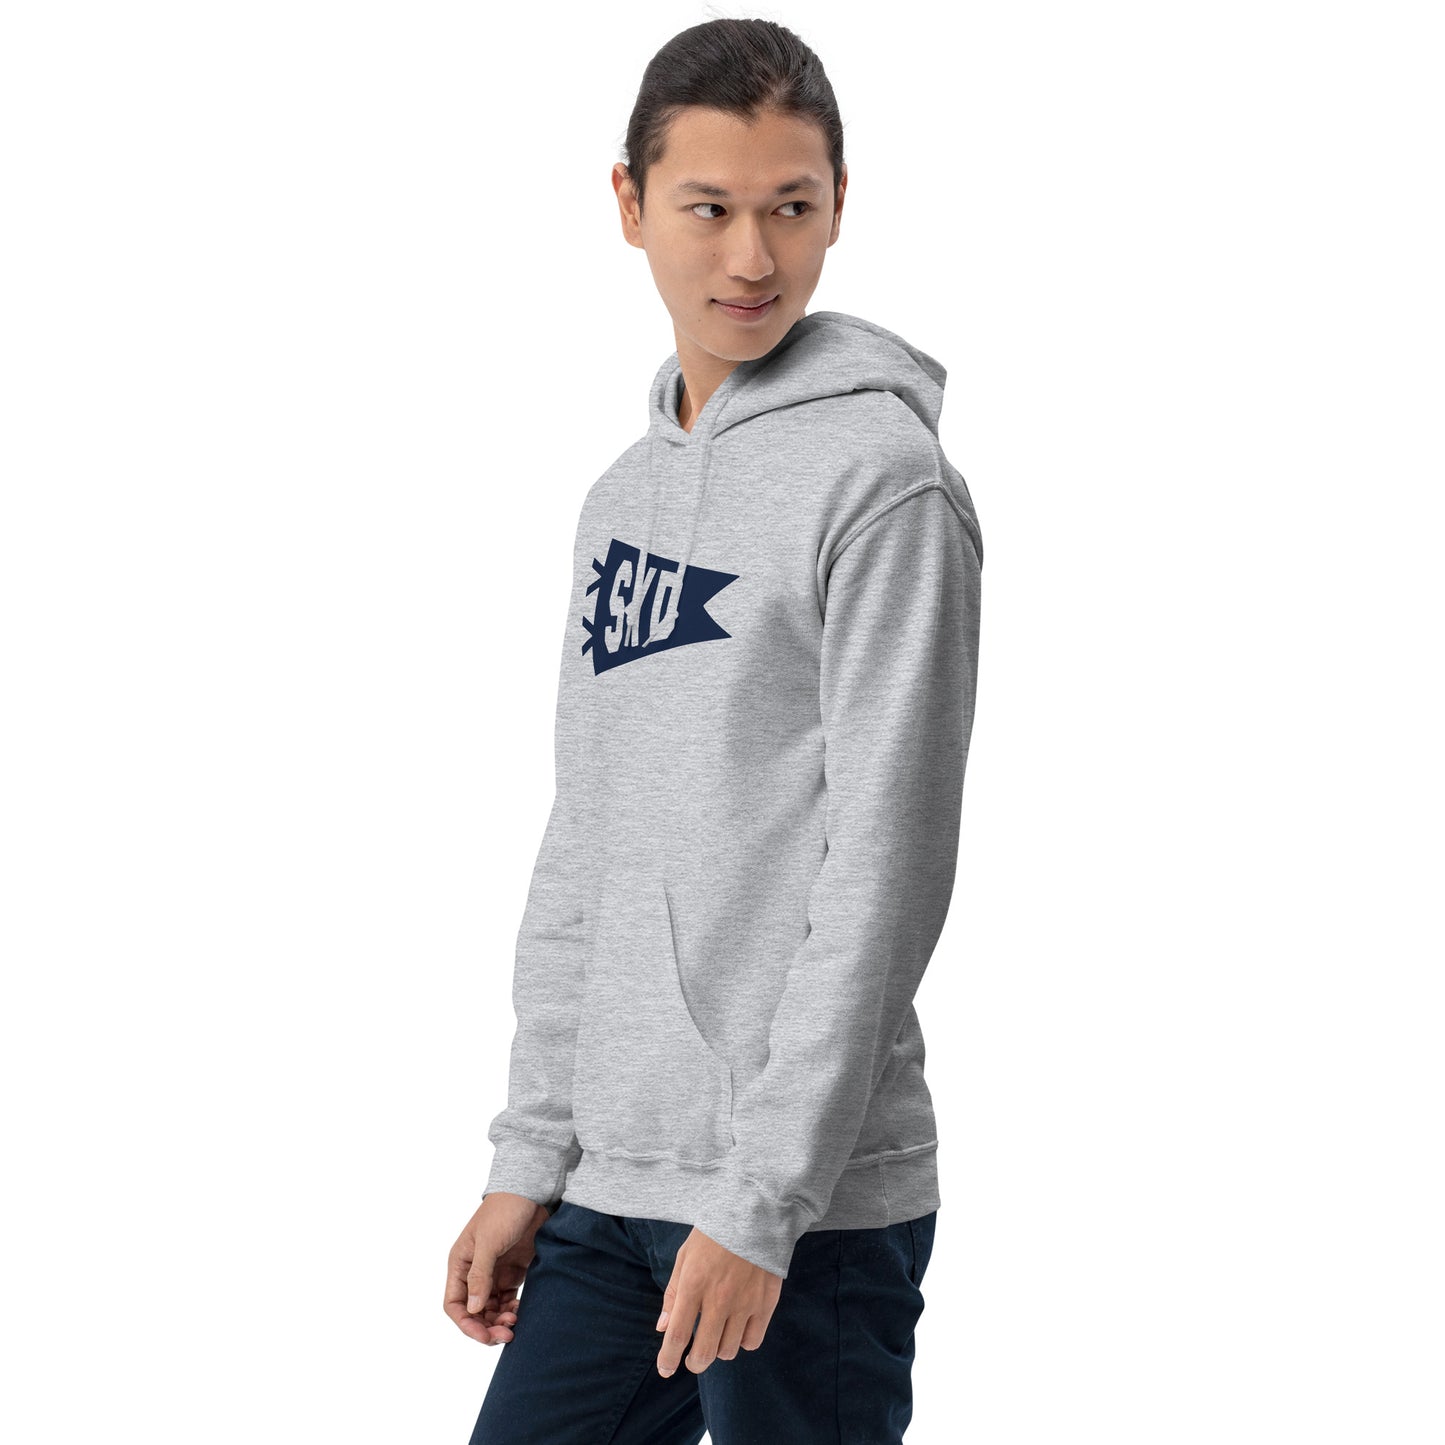 Airport Code Unisex Hoodie - Navy Blue Graphic • SYD Sydney • YHM Designs - Image 10